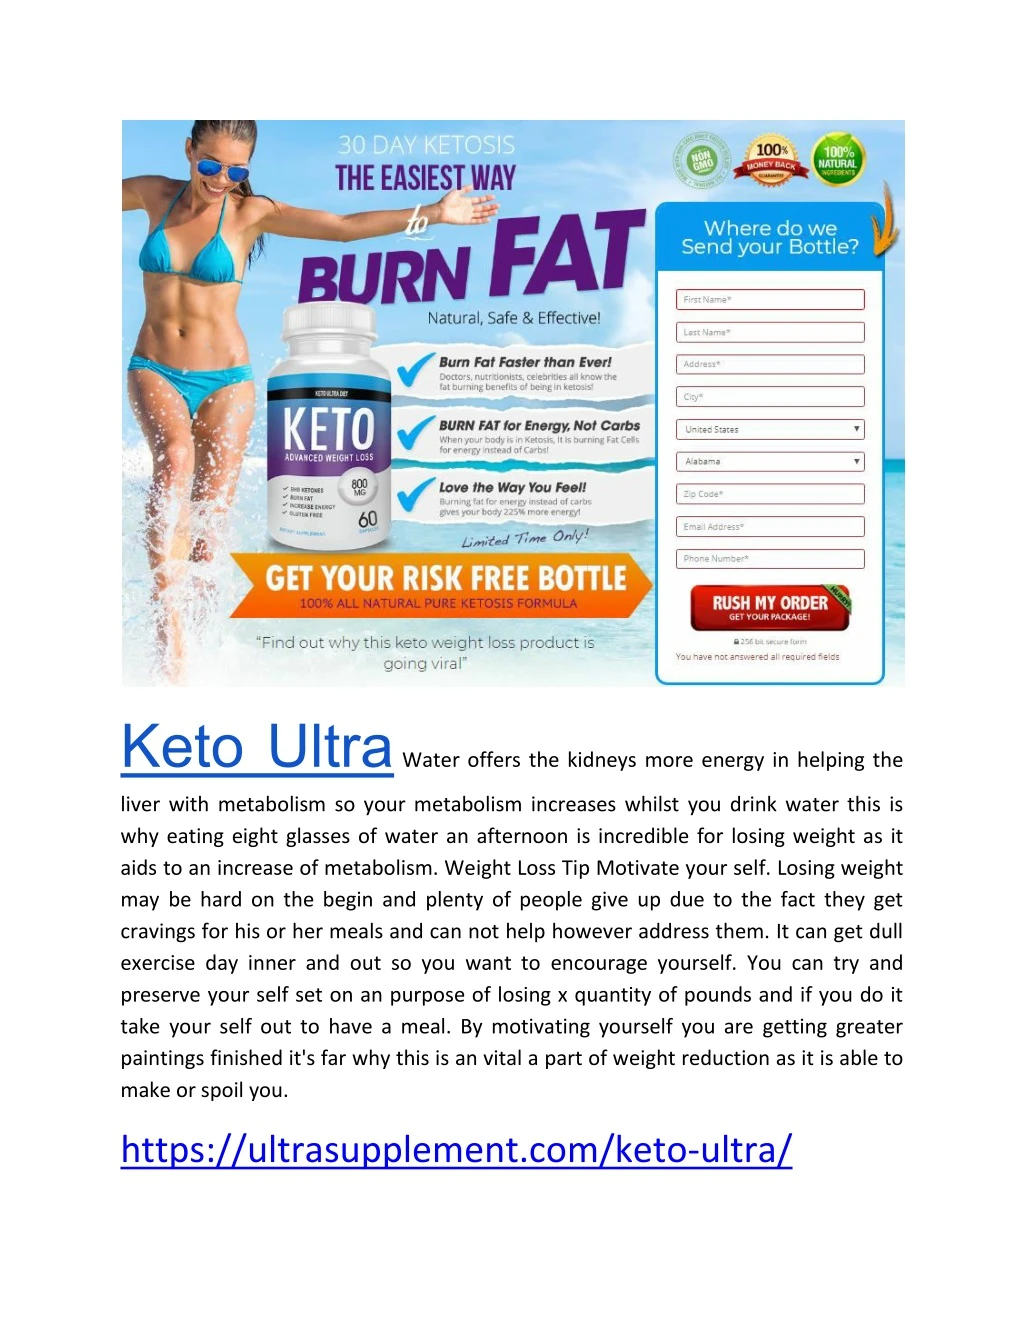 keto ultra water offers the kidneys more energy